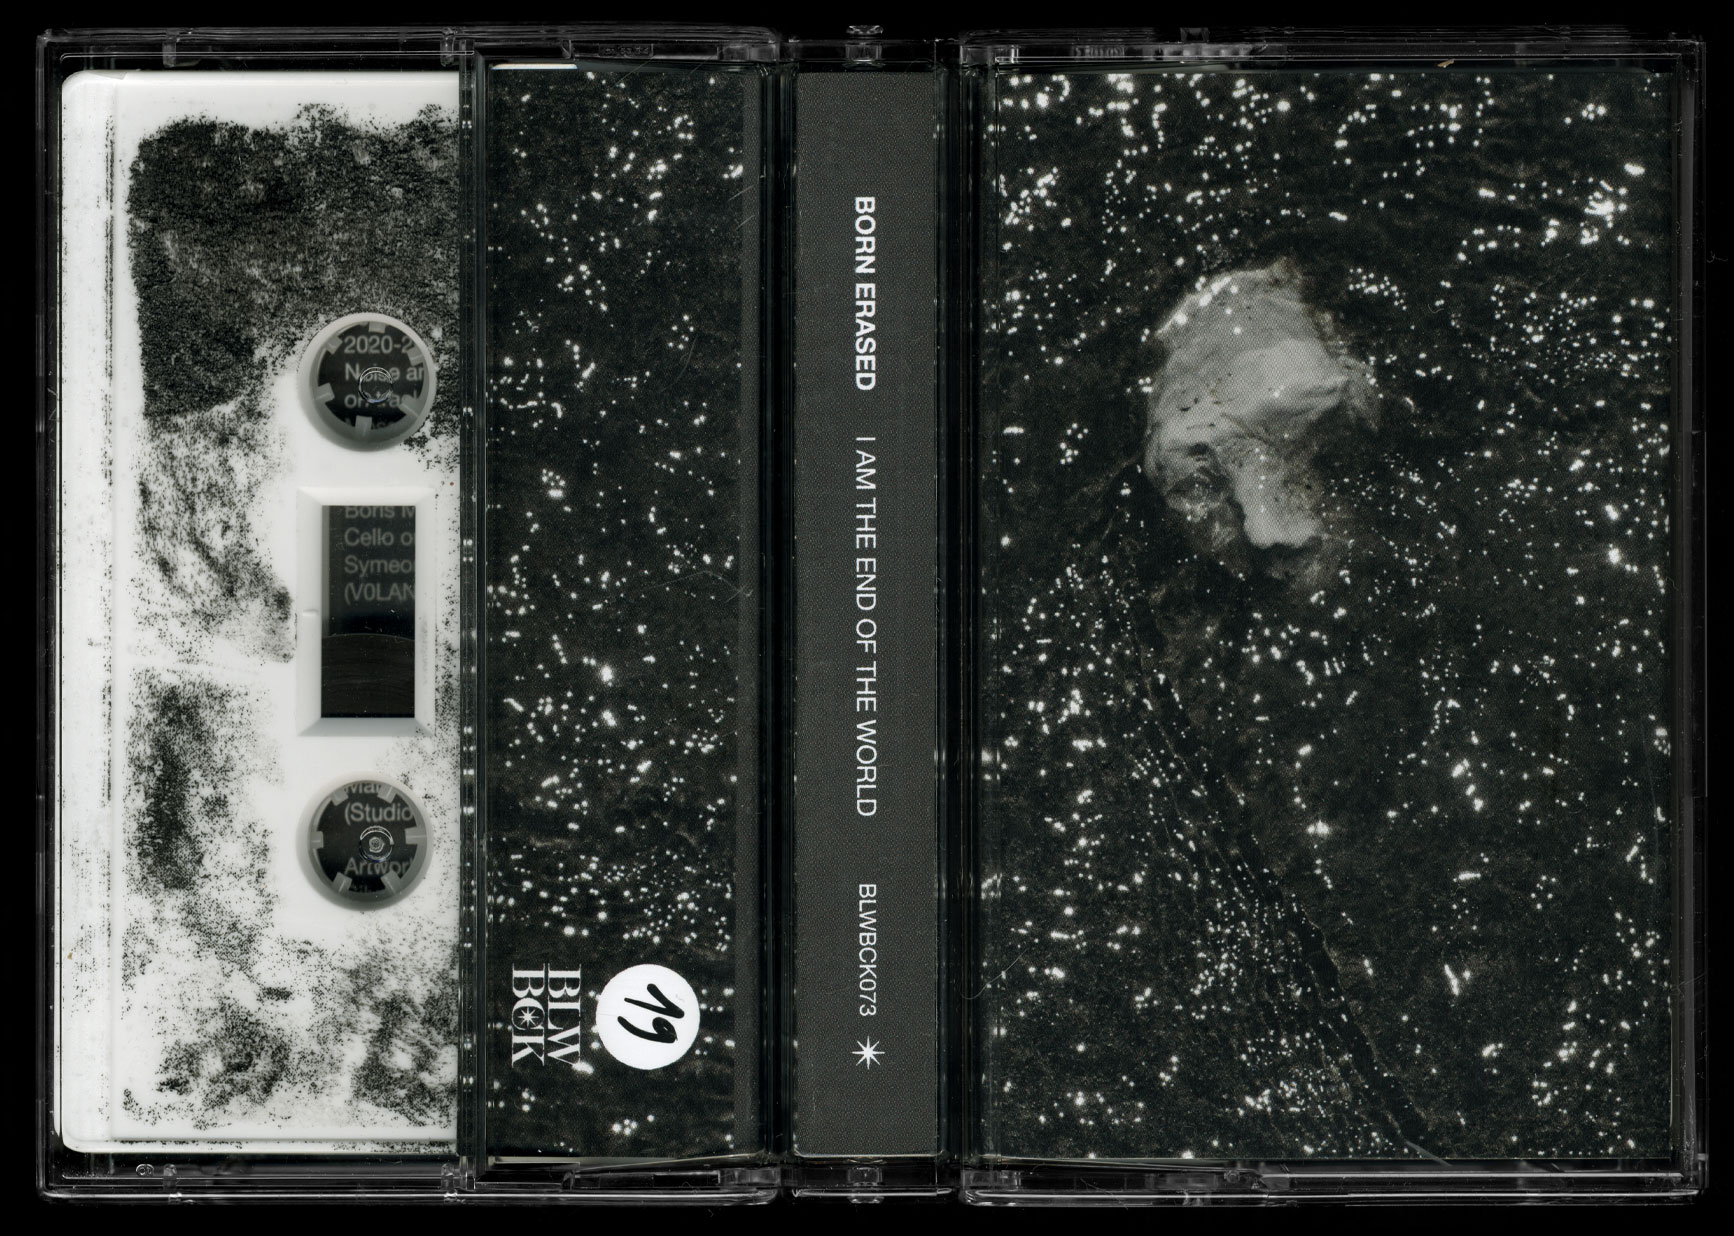 Born Erased, I Am The End Of The World, Limited Cassette Edition